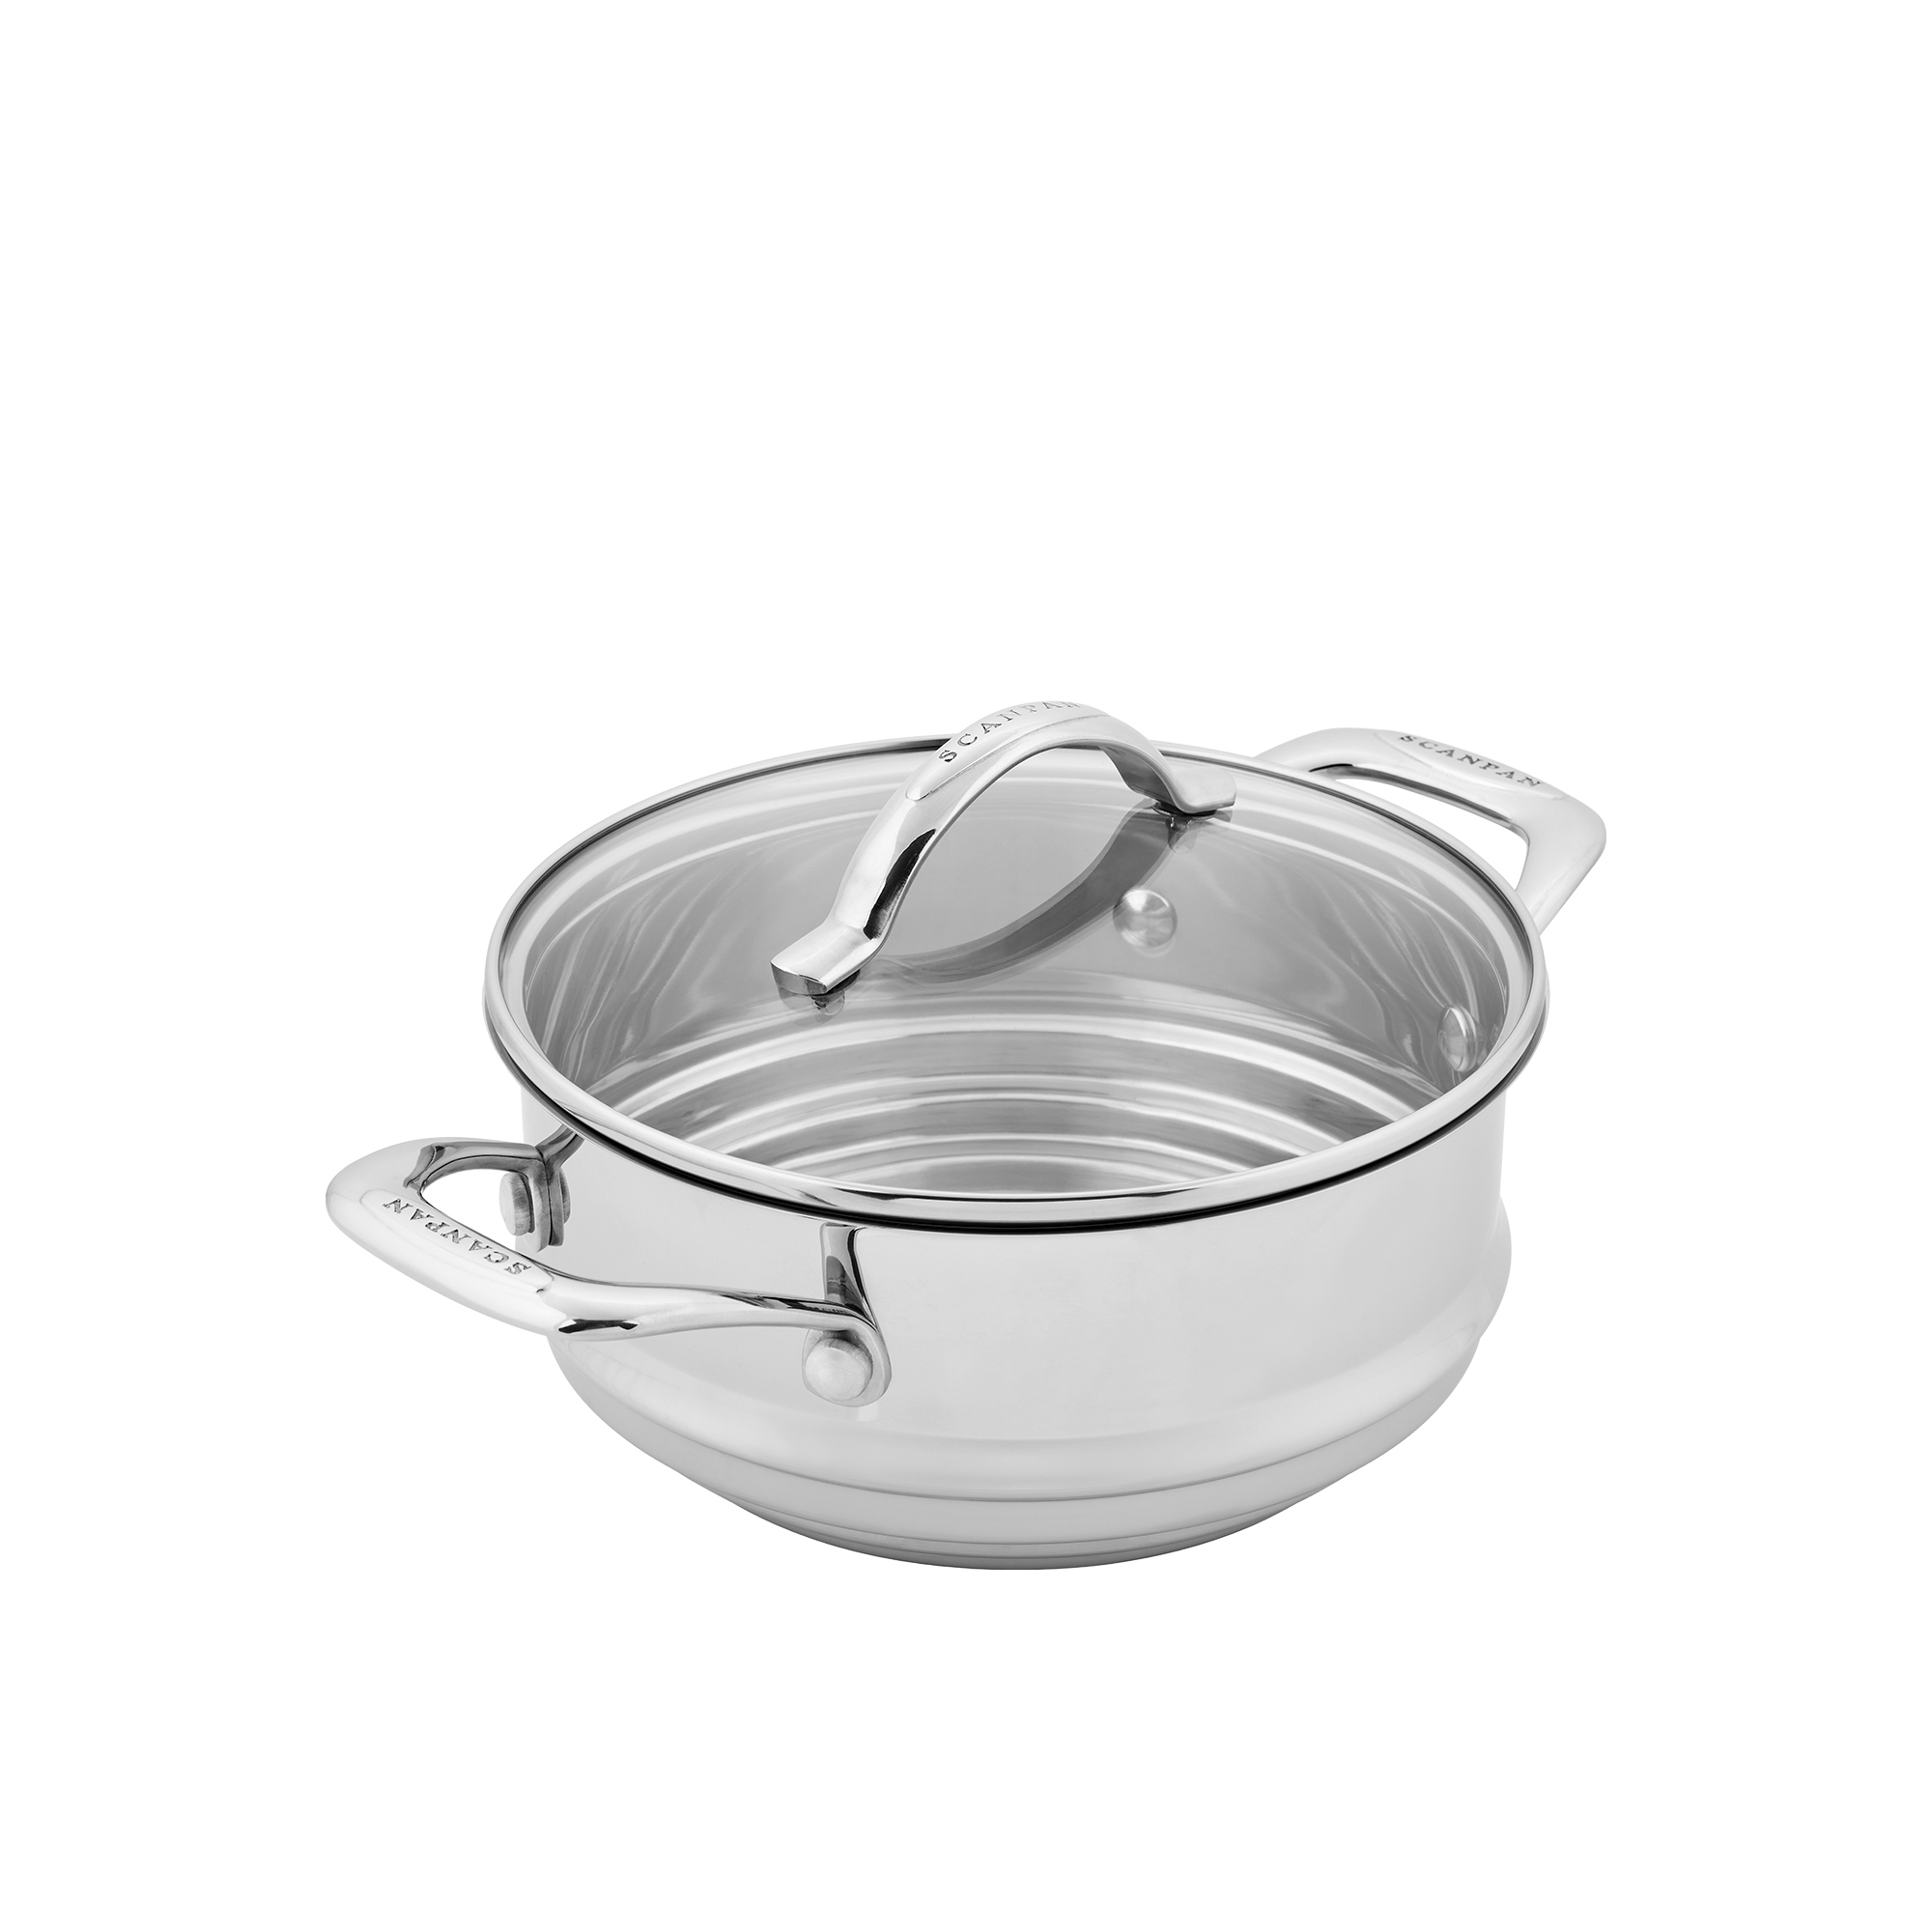 Scanpan STS Stainless Steel Multi Steamer with Lid 16/18/20cm Image 1